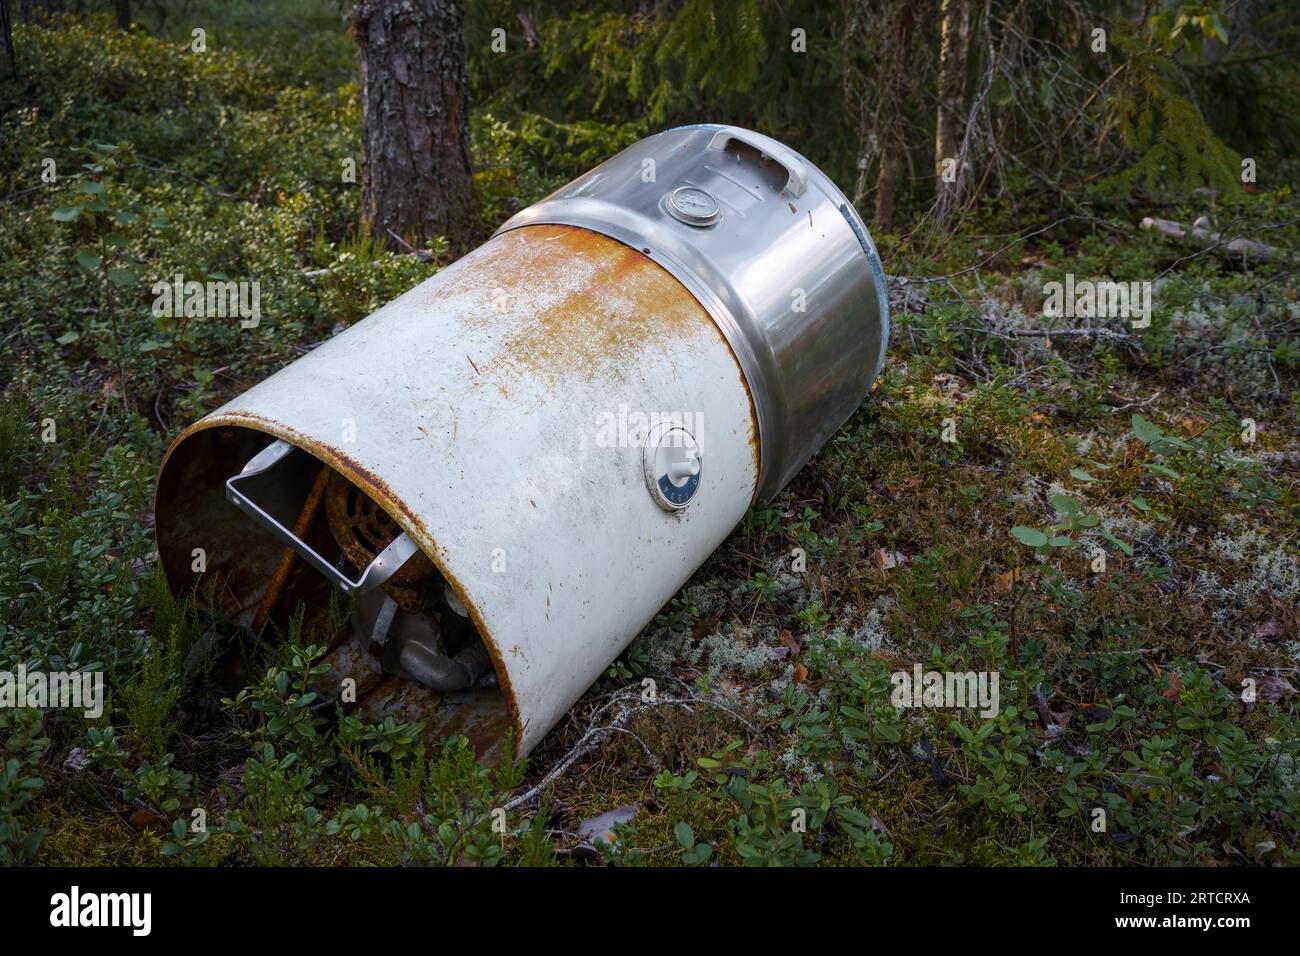 Old 1950's washing machine dumped in the woods Stock Photo